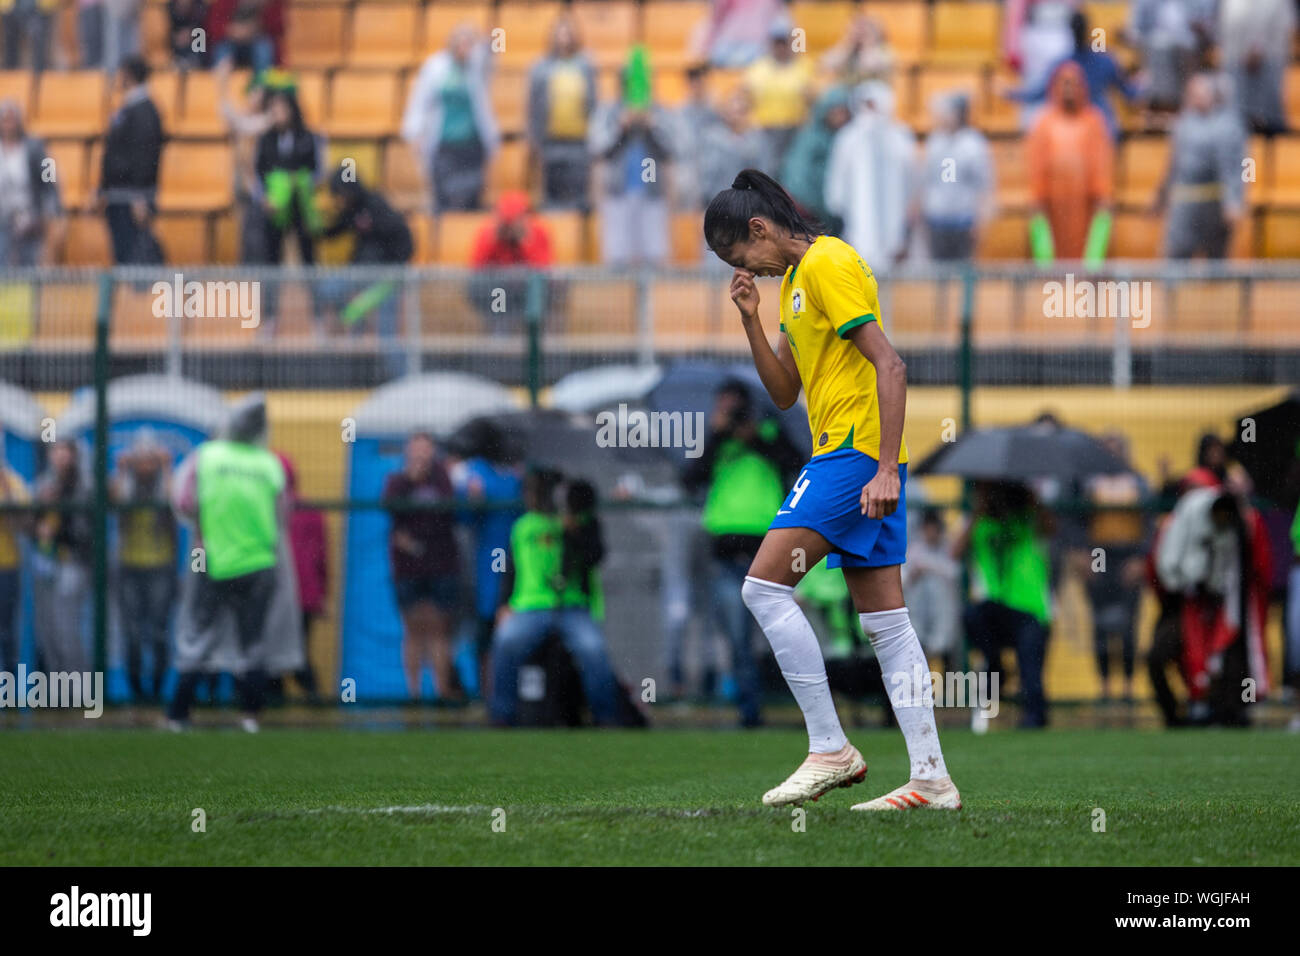 SÃO PAULO, SP - 01.09.2019: BRAZIL X CHILE - Bruna Benites regrets missed penalty. Uber Women's Soccer Cup - Chilean national team wins the Brazilian women's soccer team on penes after a 0-0 draw in normaormal time. With a lot of rain, which dited the football of both tea teams, and with audience of 15,047 paying and income of $ 174,073.00. The match took place this Sunday, September 1st, 2019, at Pacaembu Stadium, in São Paulo. (Photo: Van Campos/Fotoarena) Stock Photo